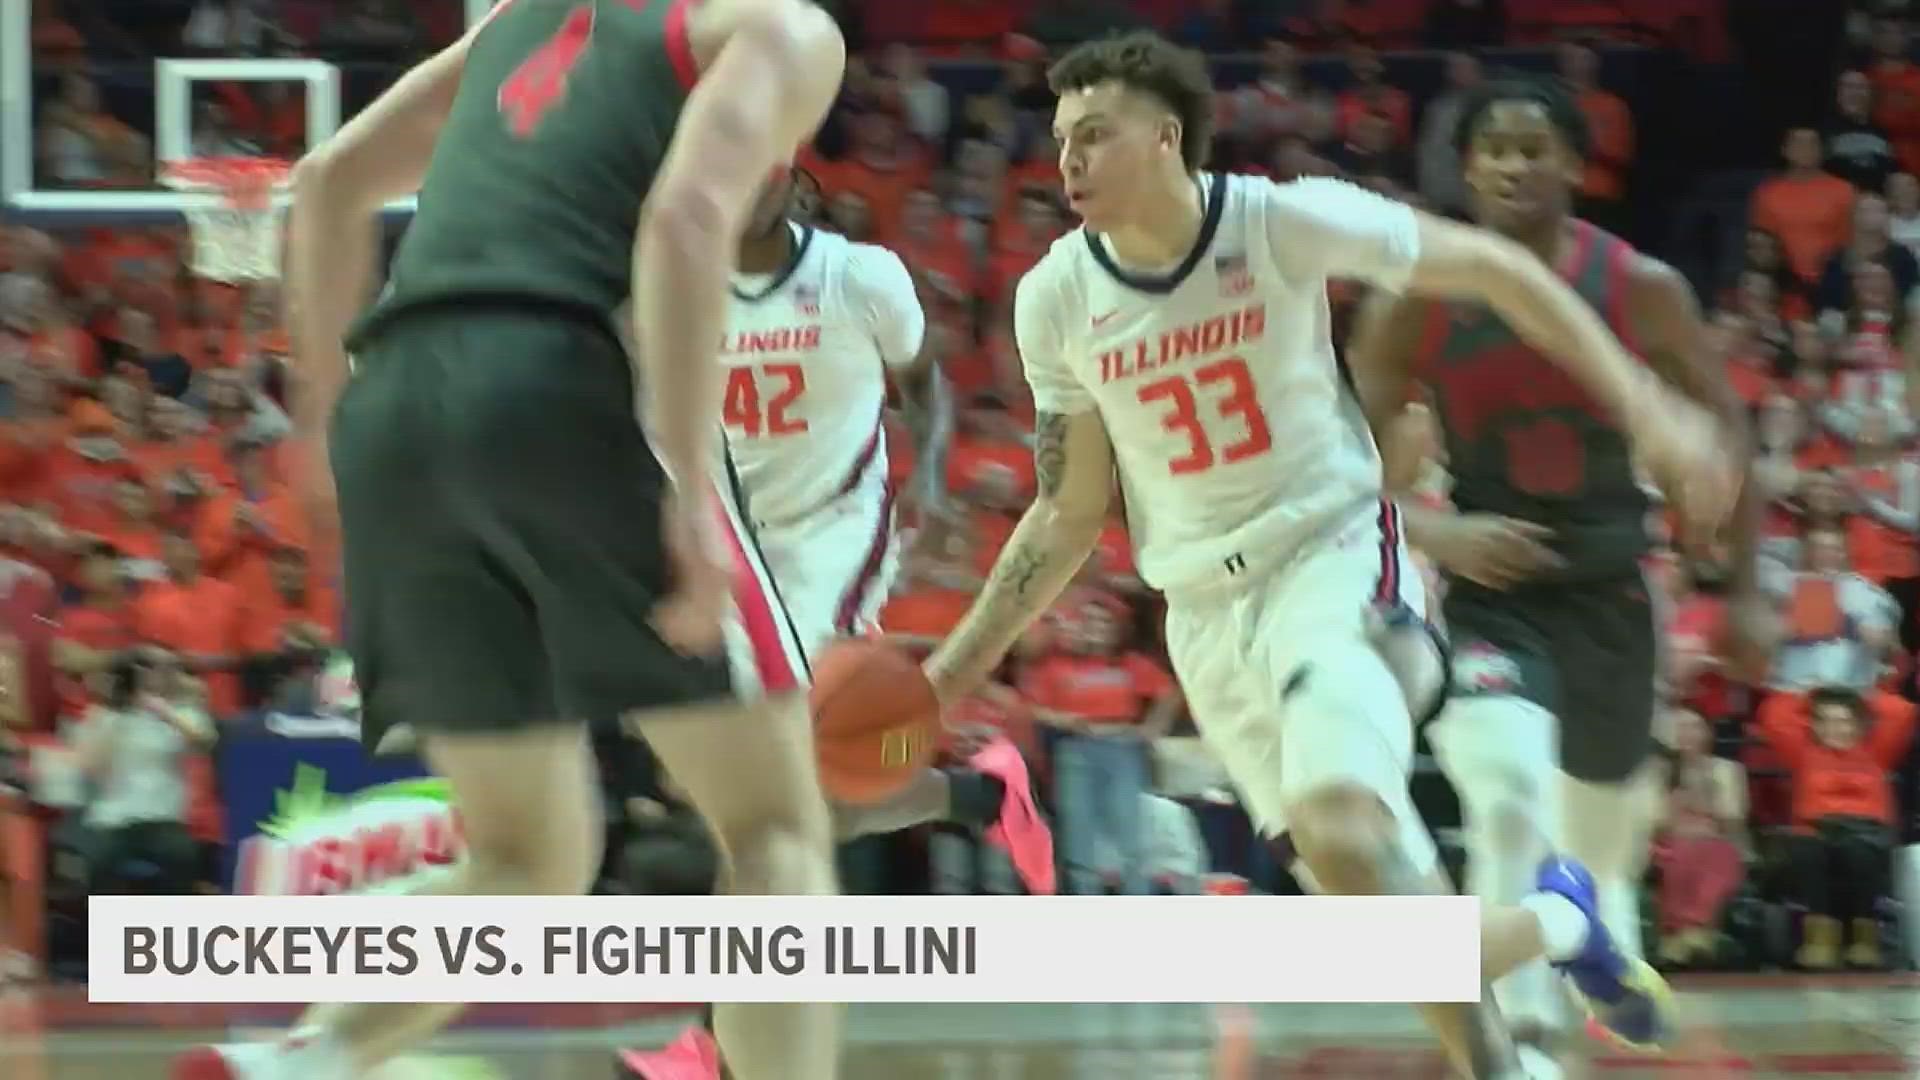 The Illini are looking to get back on track in the conference as they took a 9-point win from Ohio State at home.